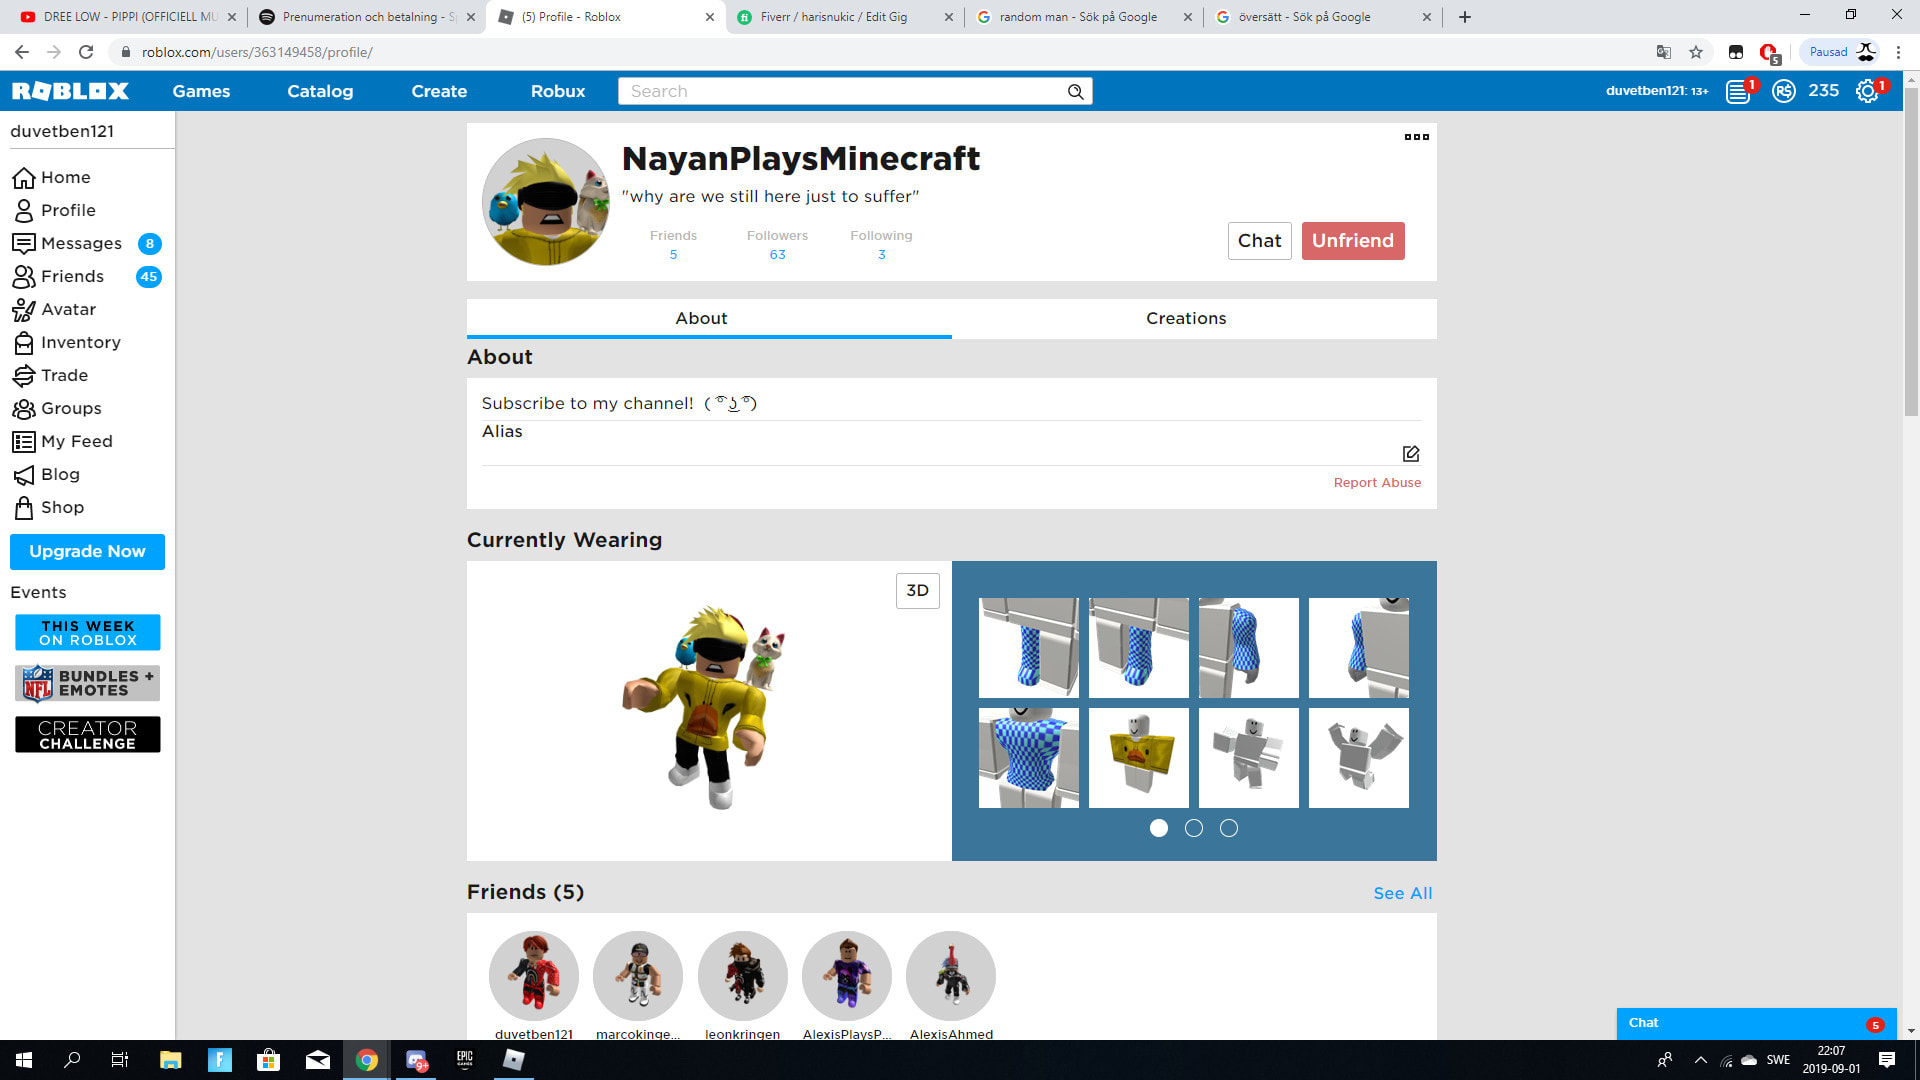 Selling Roblox Acount Worth 50 Dollar By Harisnukic - how much robux can you get with 50 dollars